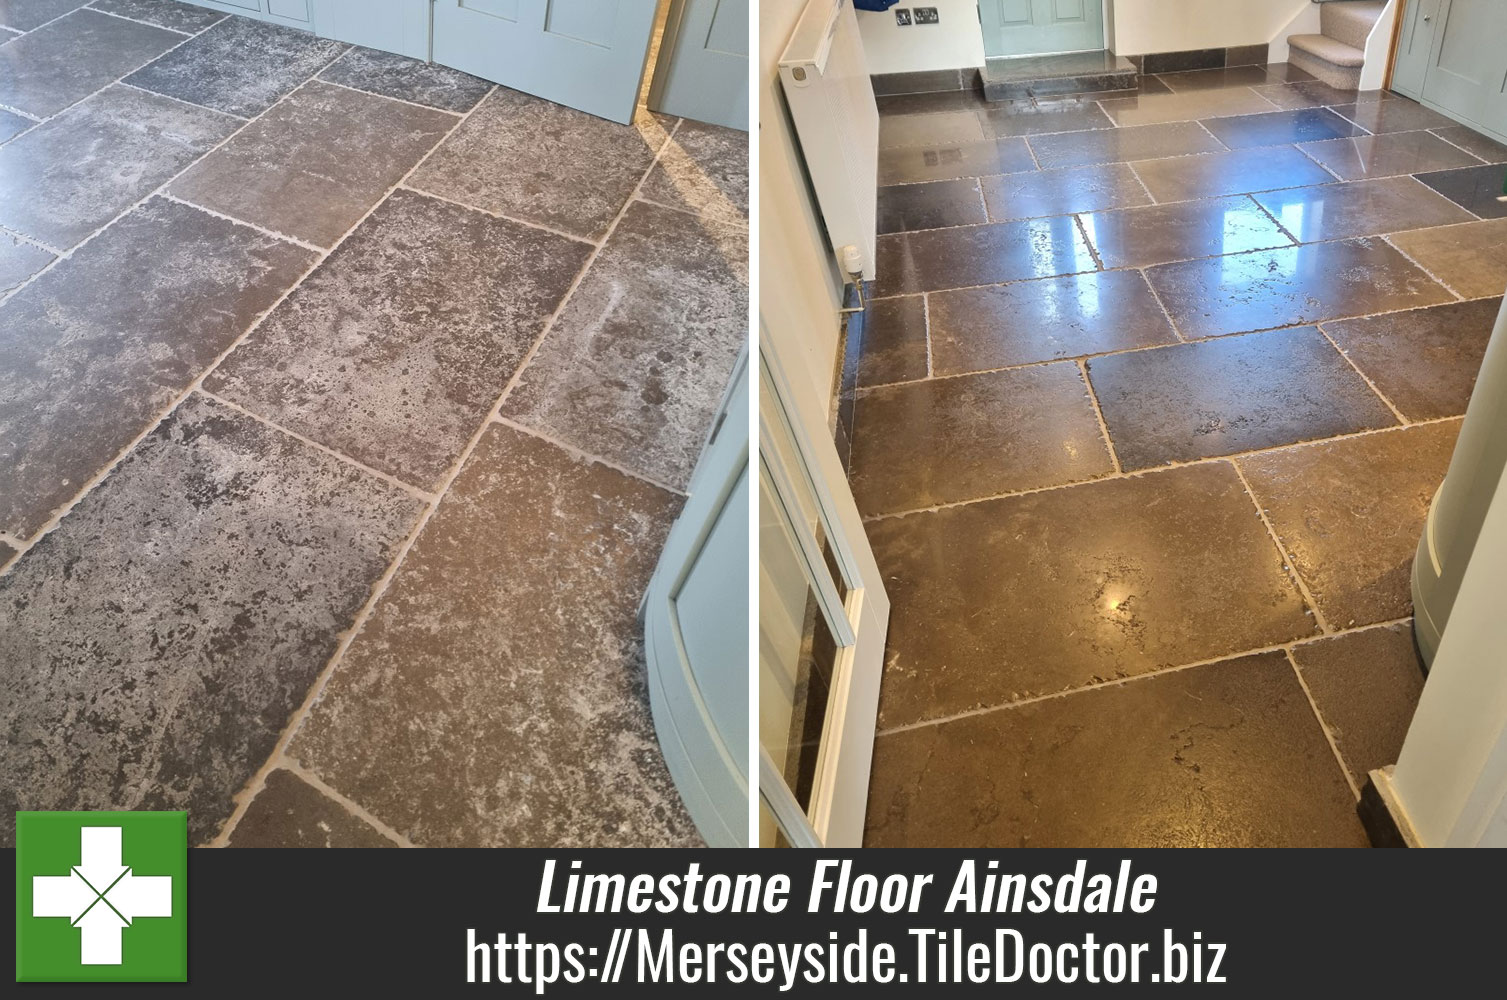 Restoring the Appearance of a Polished Limestone Floor with Tile Doctor Burnishing Pads in Ainsdale Merseyside